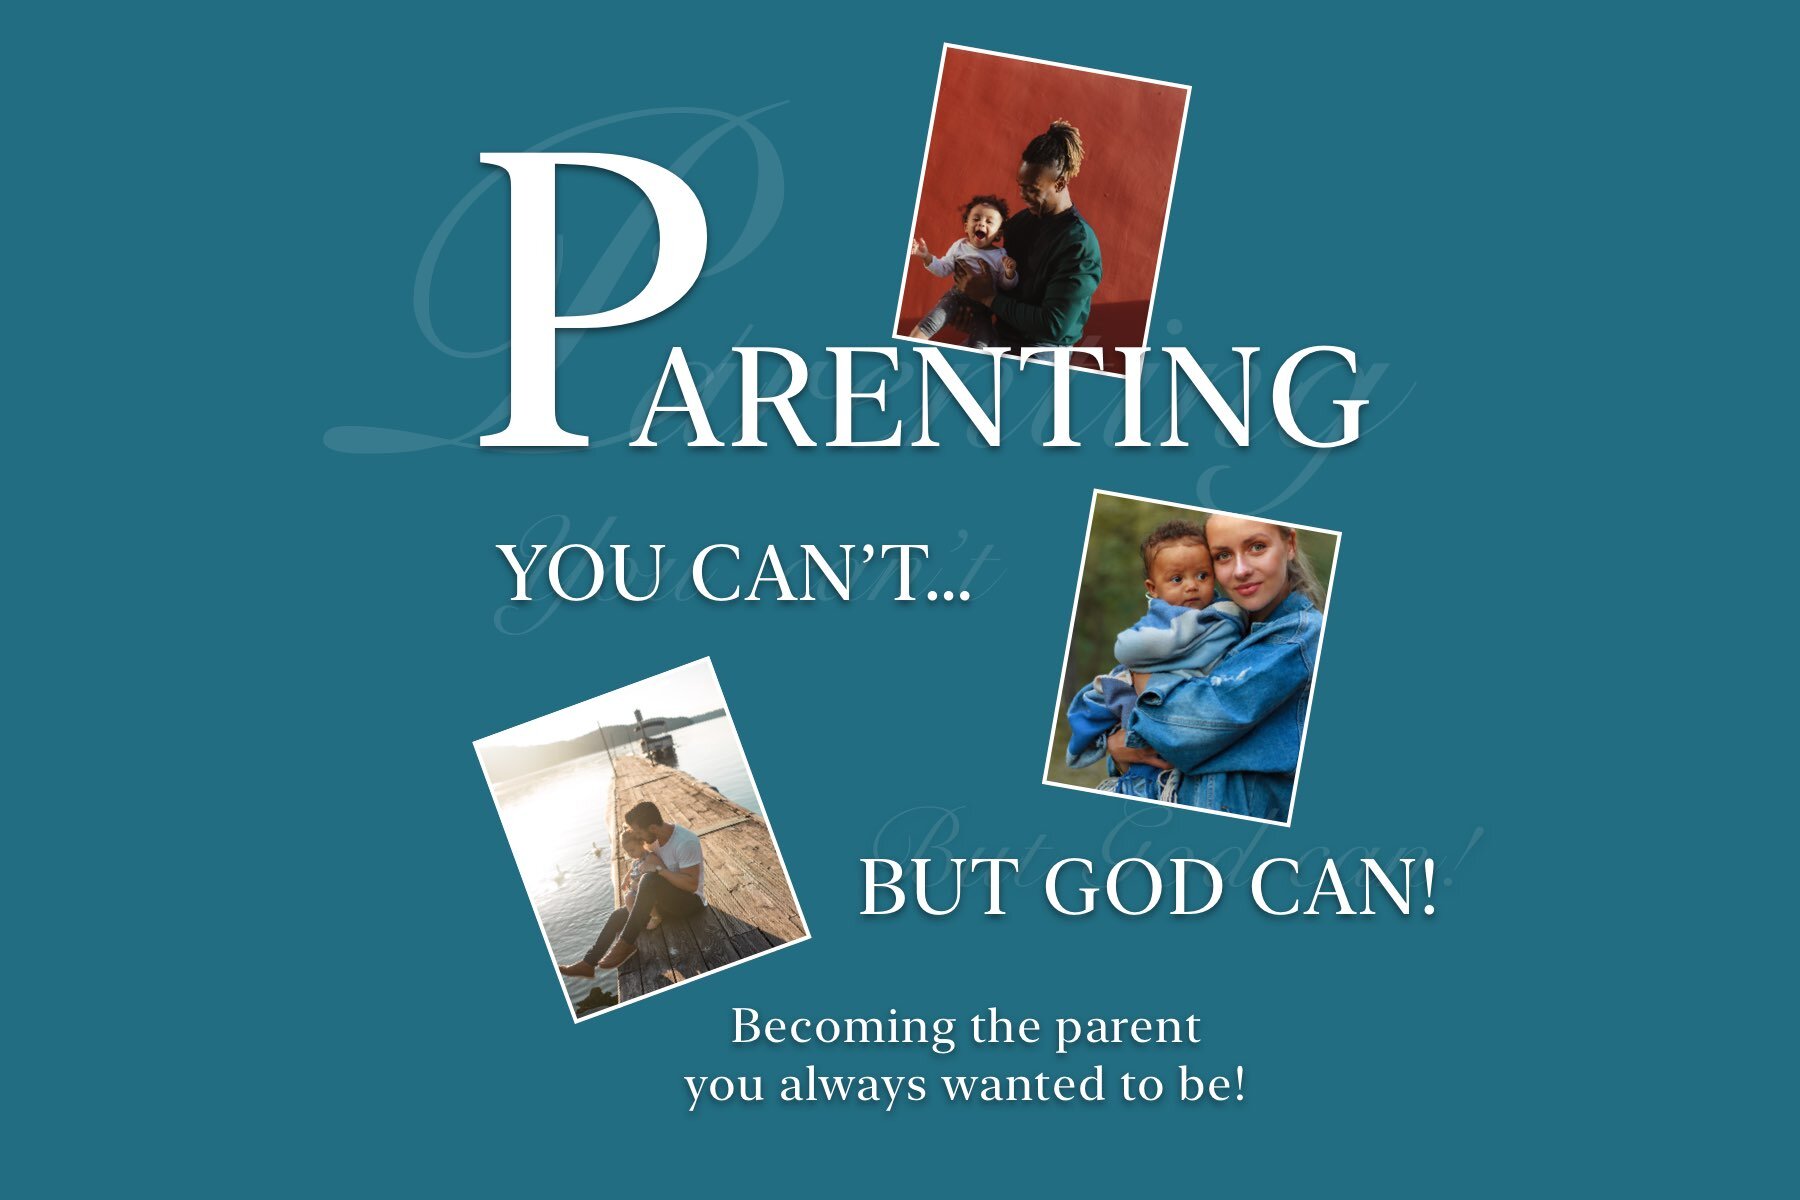 Parenting - You Can't but God Can